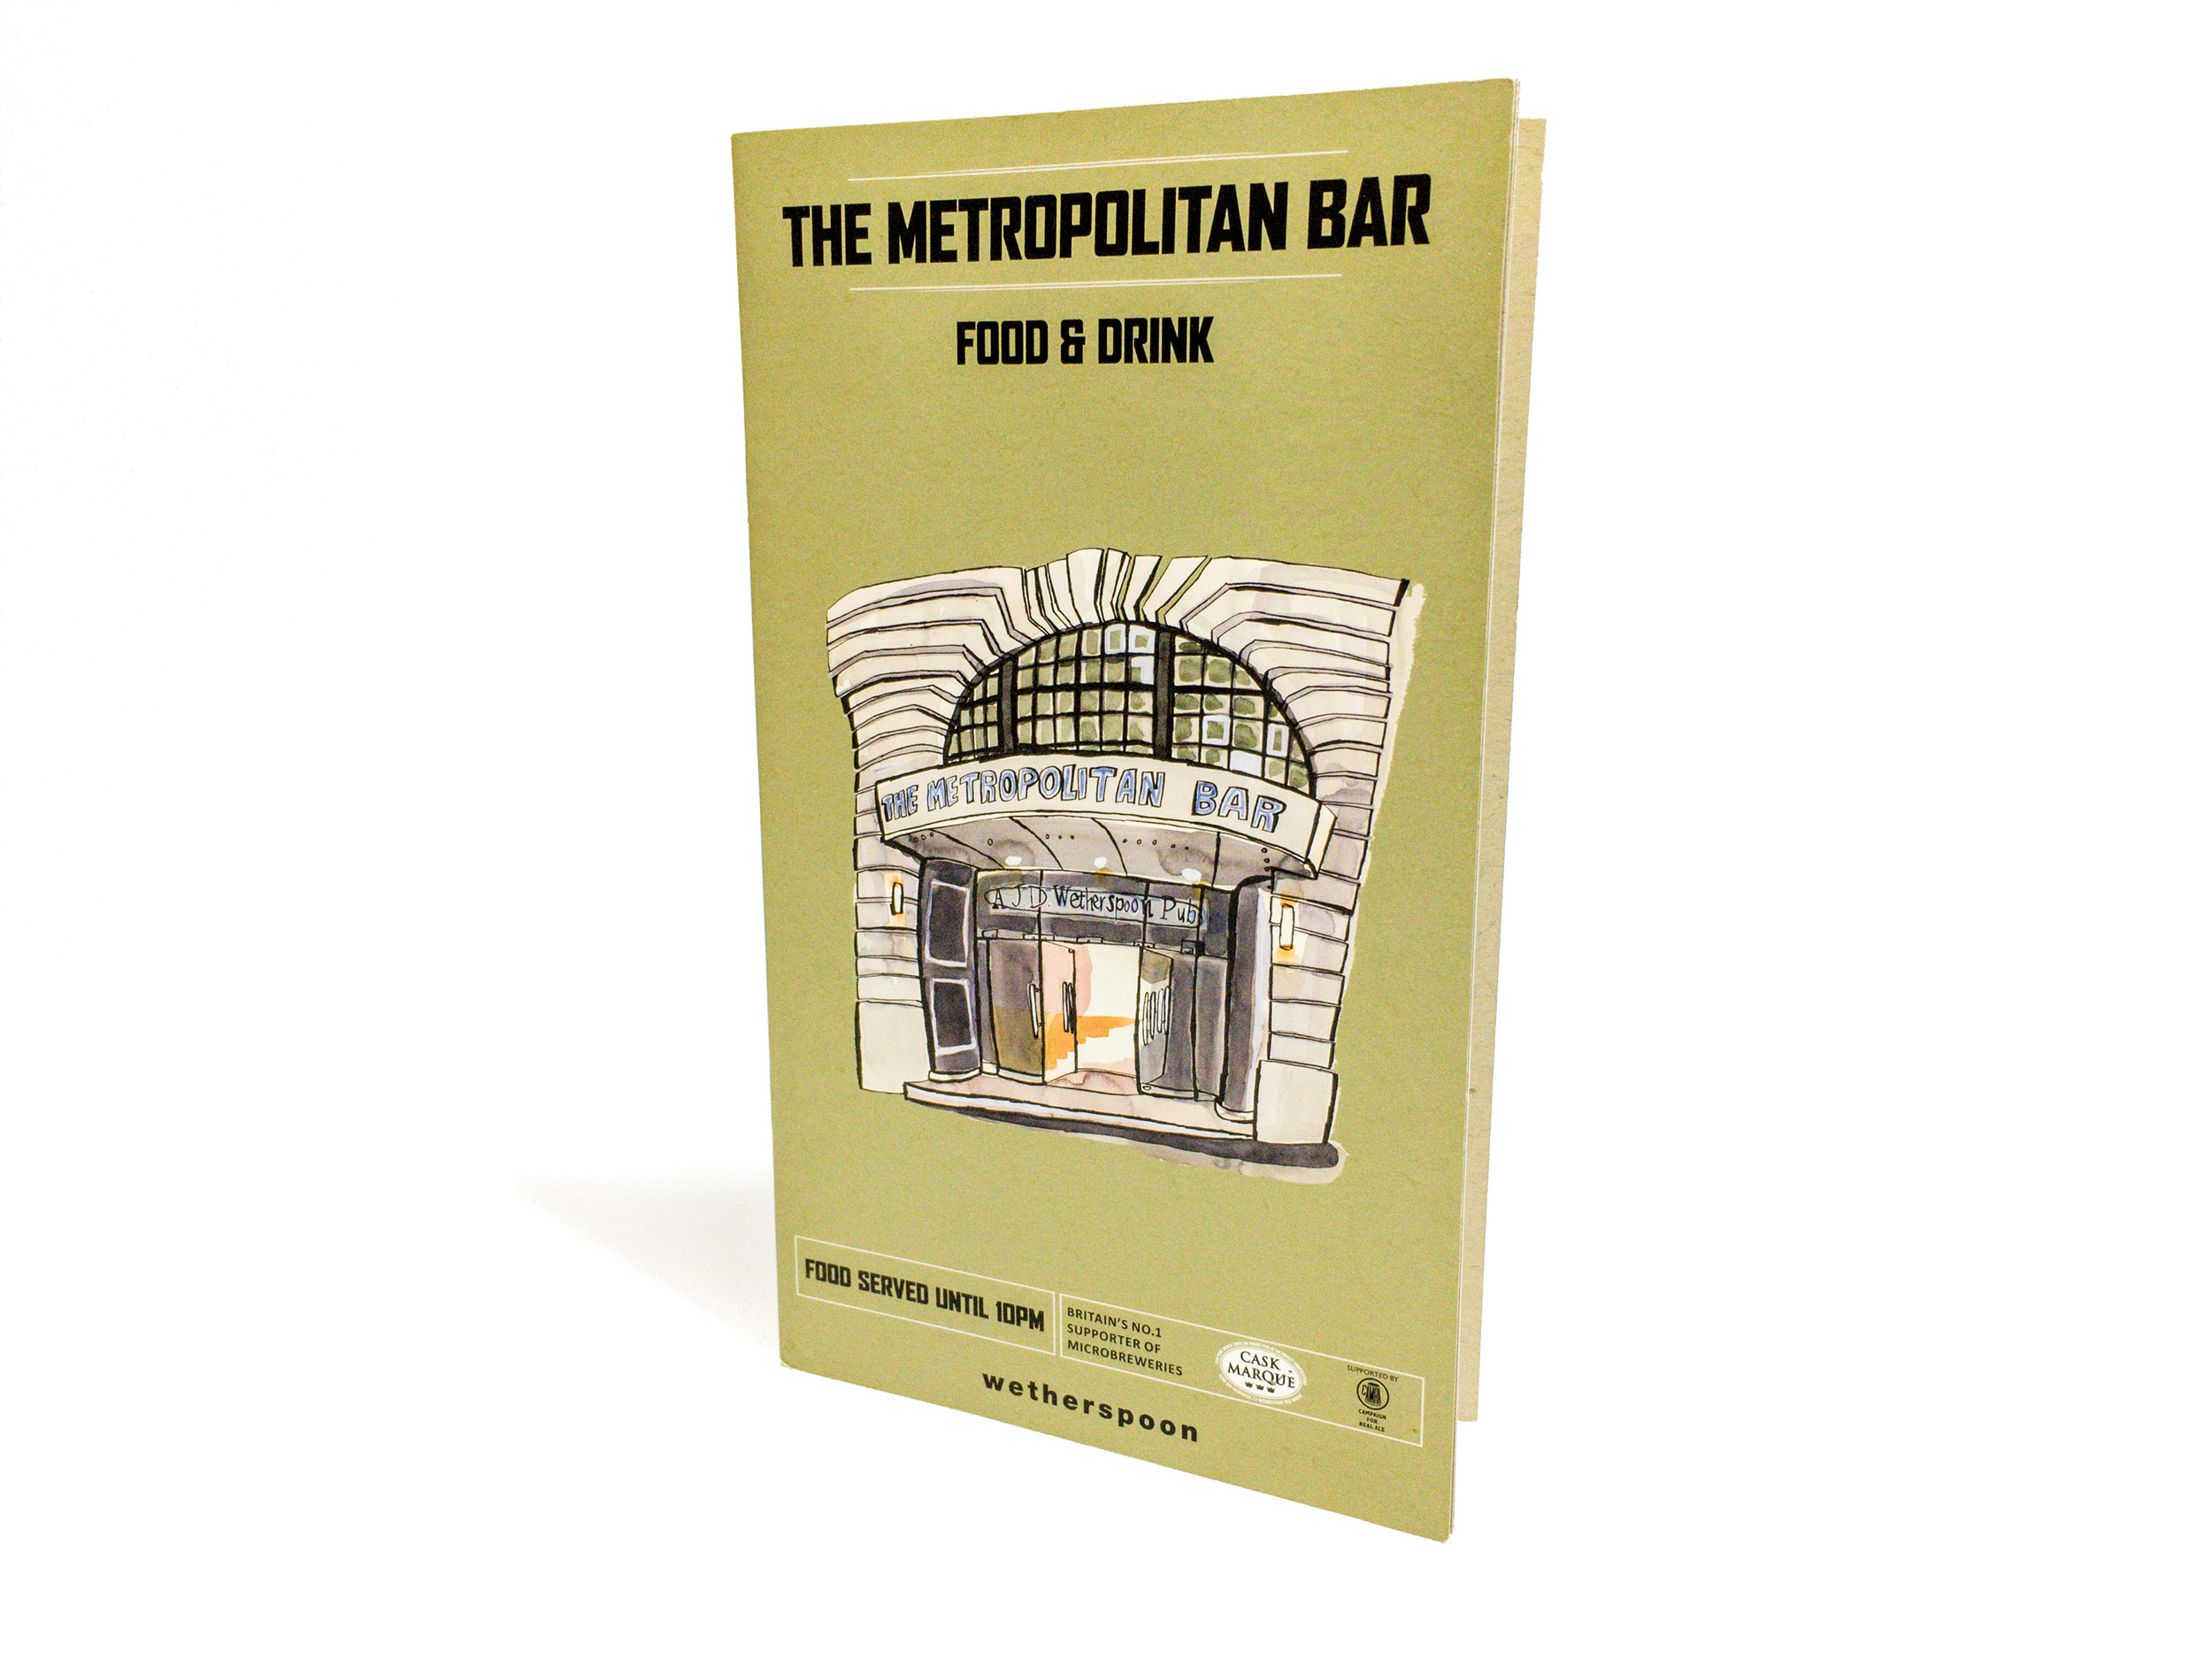 Wetherspoon menu illustrations by James Oses, image 5